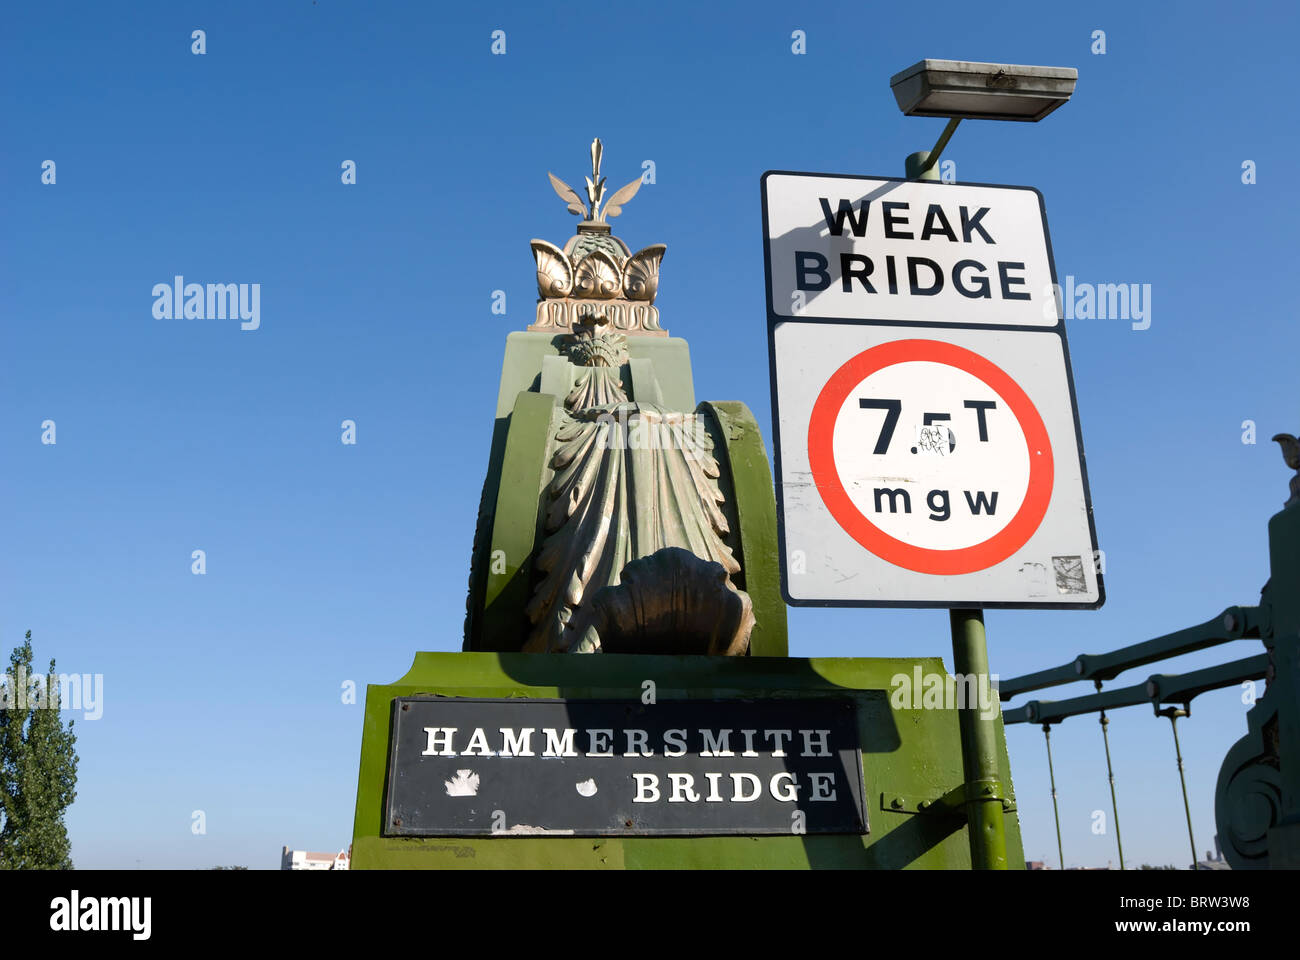 weak bridge sign with warning of traffic being restricted to 7.5 tonnes or less, at hammersmith bridge, london, england Stock Photo